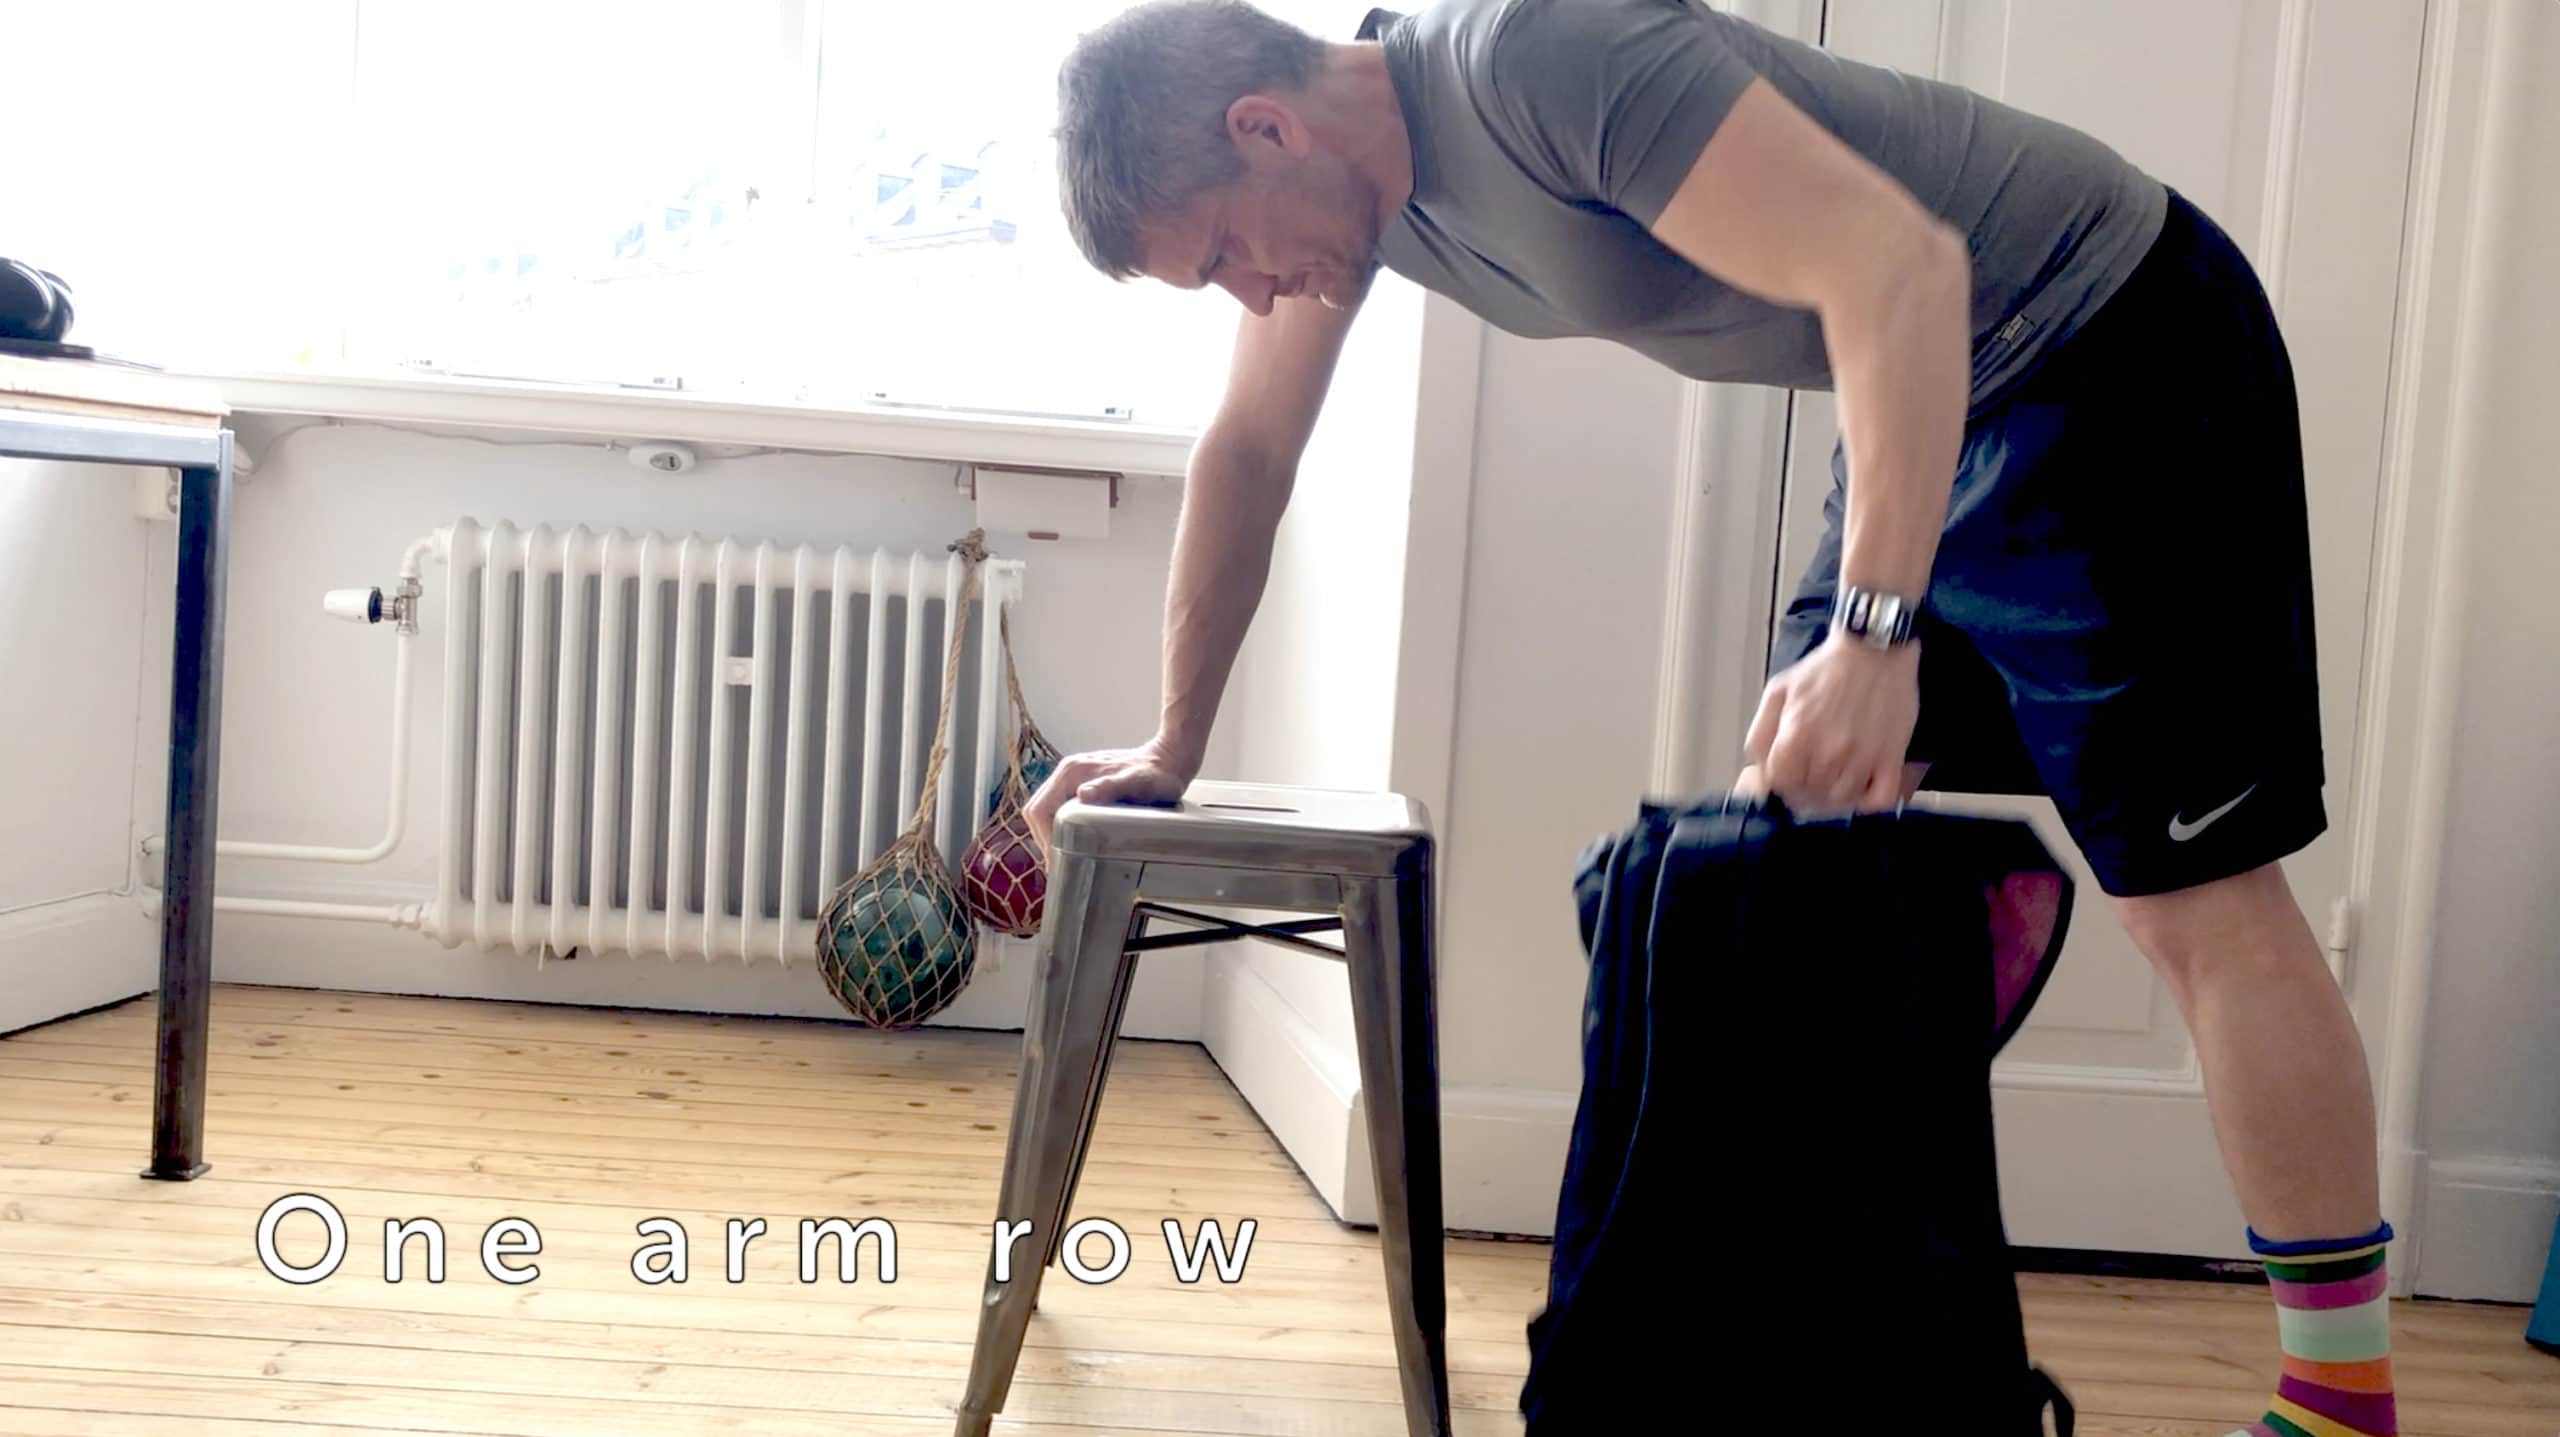 Fill a rucksack with heavy objects for an effective one-arm row.